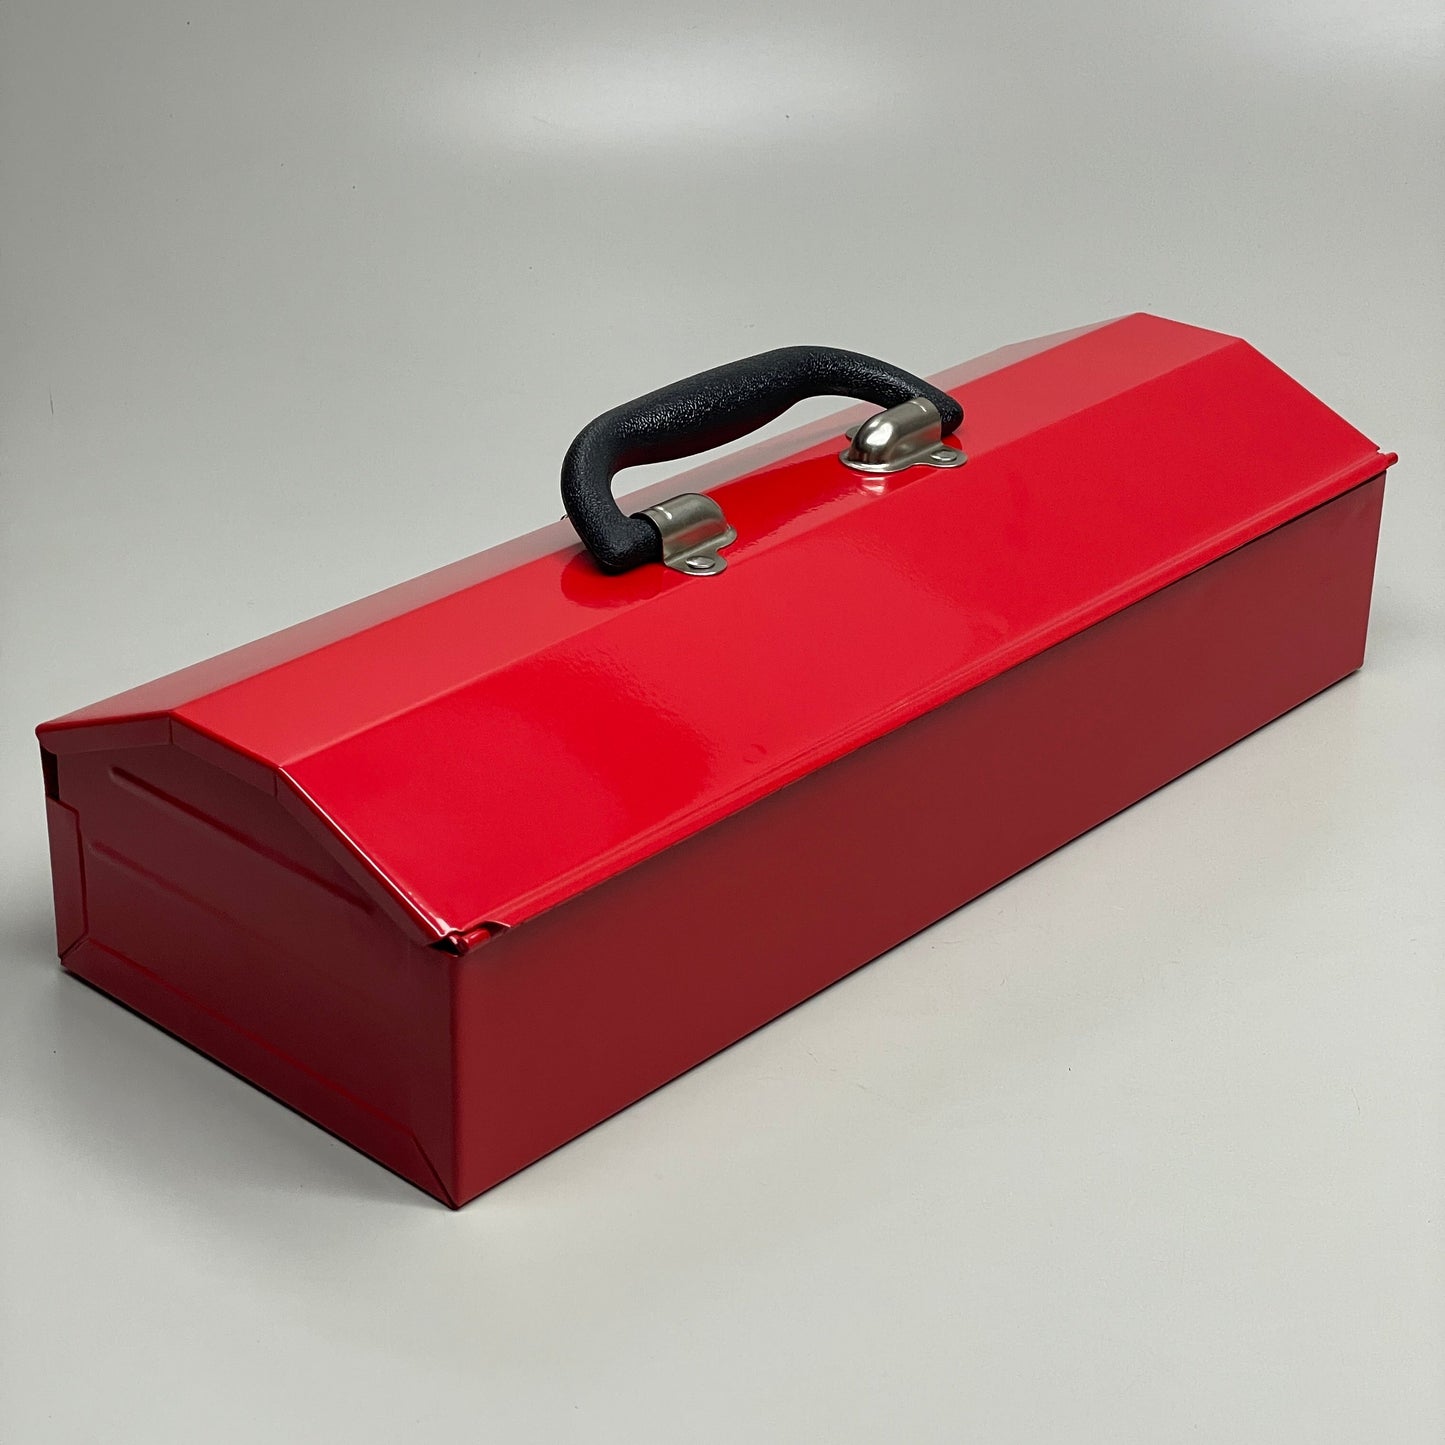 z@ BIG RED Torin 16" Professional Hip Roof Style Portable Steel Hand-Away Tool Box TB102 J